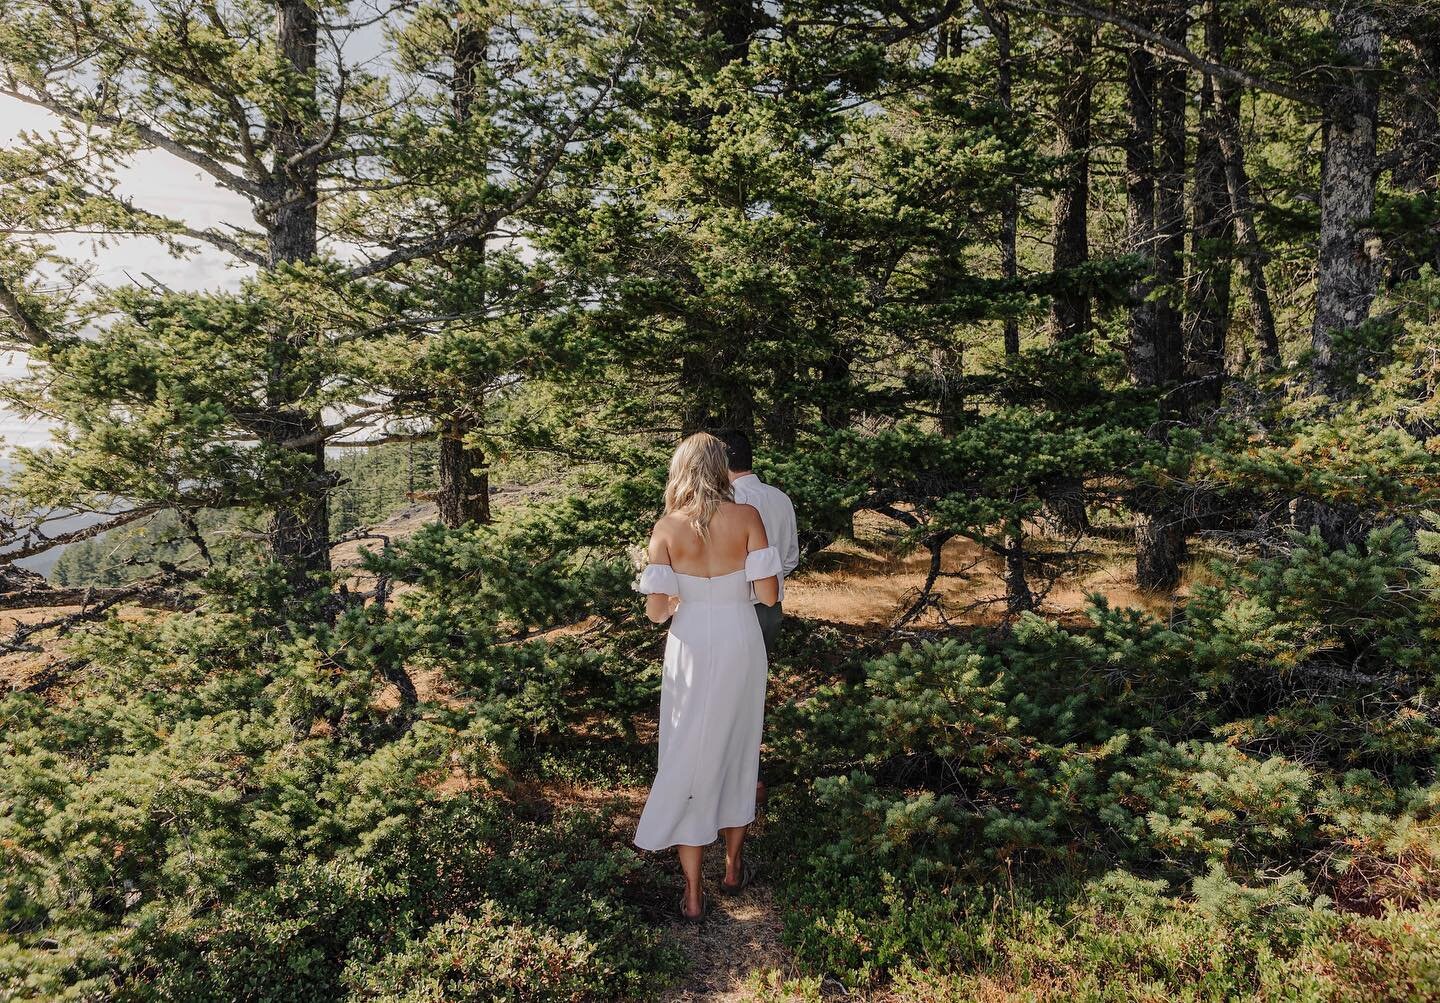 Eloping in true Salt Spring Island fashion. Bare foot wandering into Mount Maxwells forest after having receipted private vows on the mountain top. 

In just over a month my wedding season will start with the sweetest Vancouver Island elopement - to 